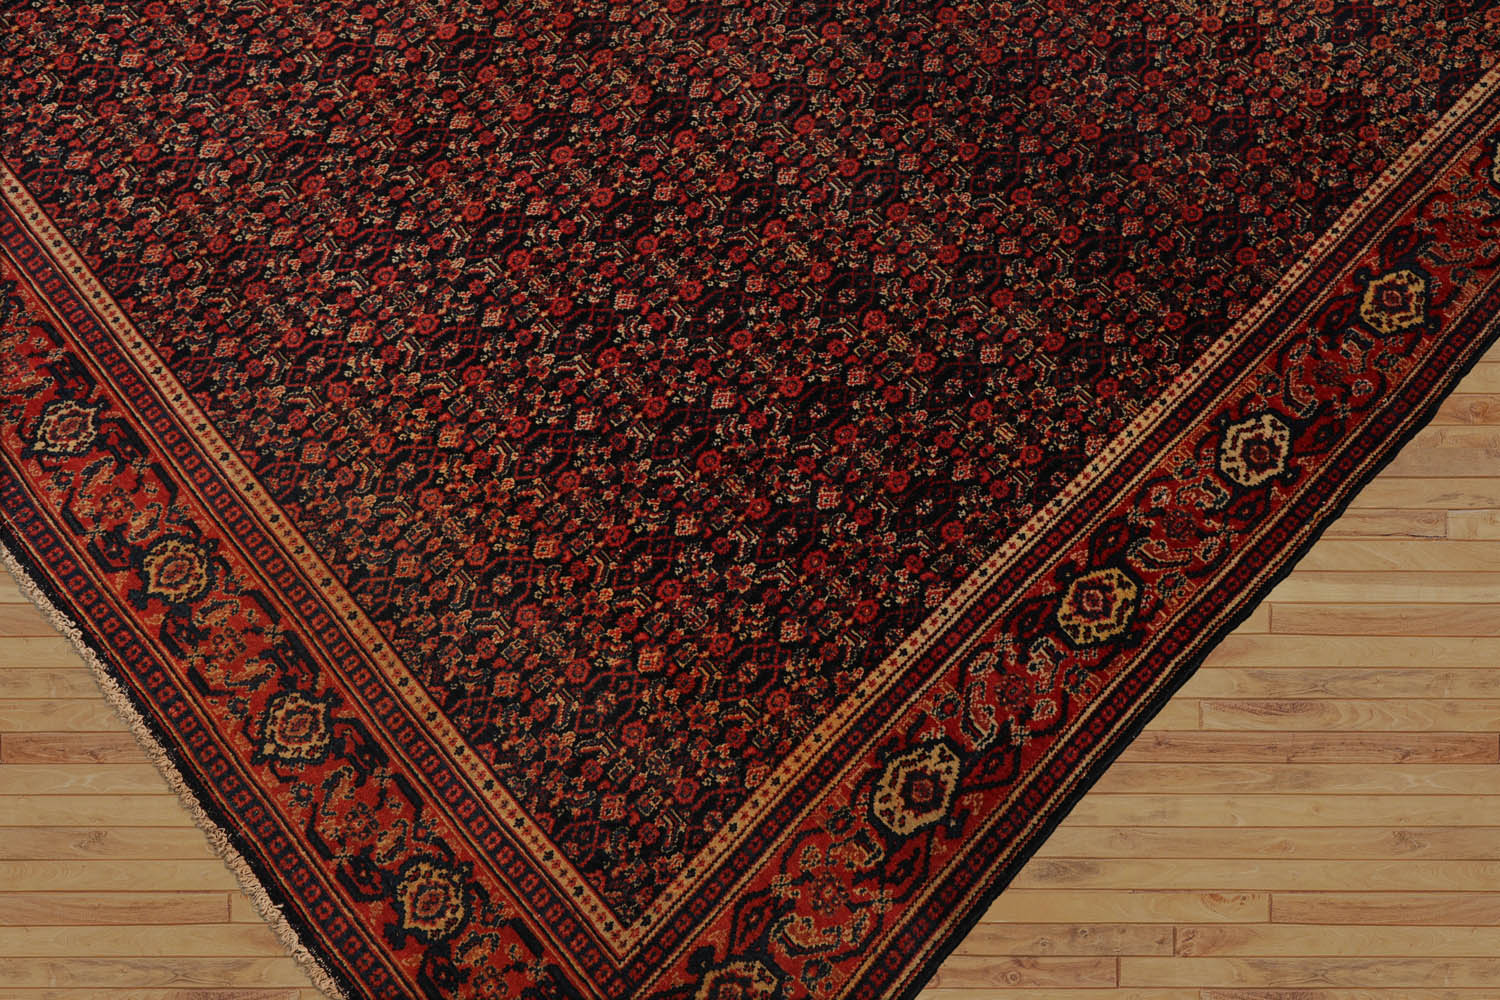 Faedo 10x14 Hand Knotted Persian 100% Wool Antique  Traditional  Oriental Area Rug Black,Orange Color